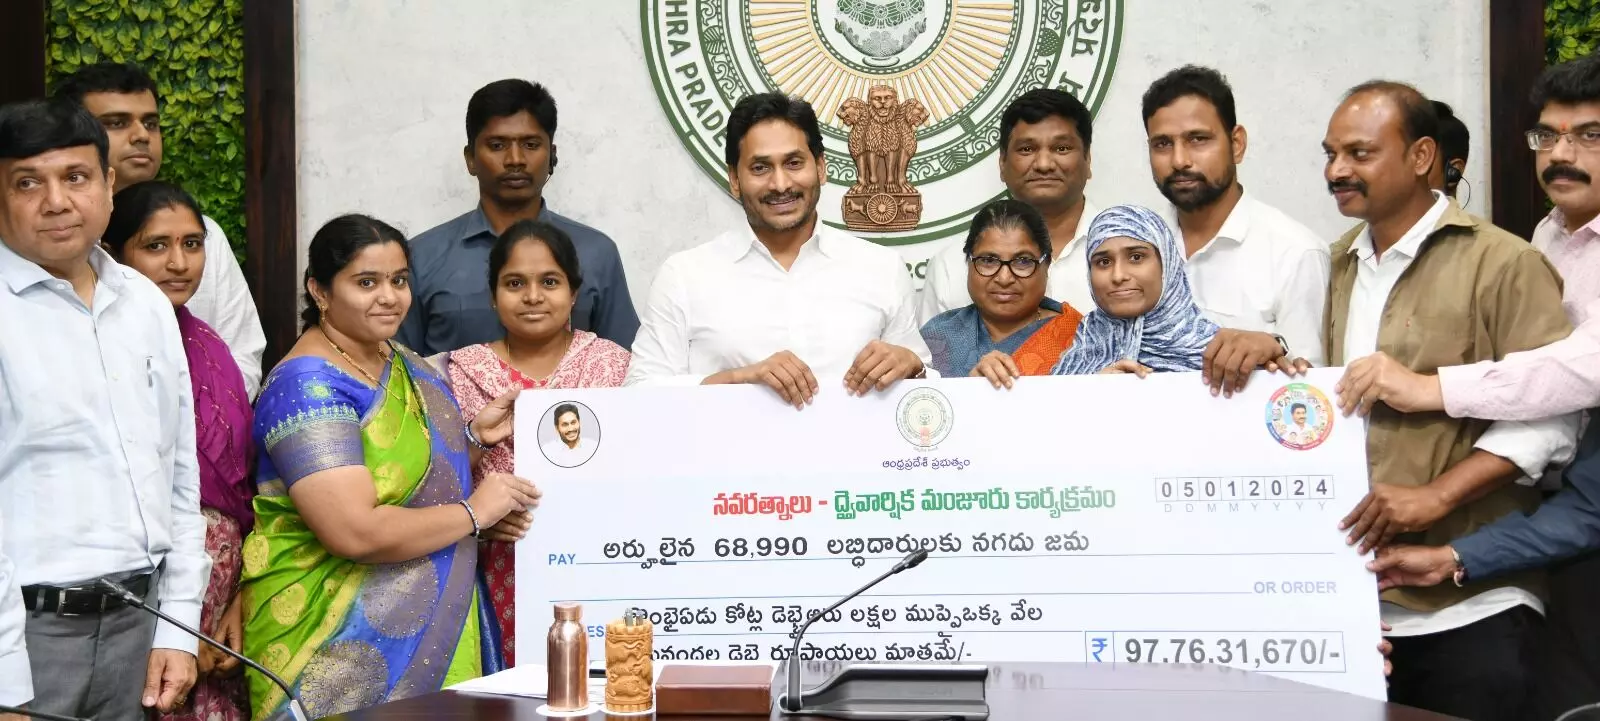 YS Jagan releases Rs 97 crore for clearing dues of welfare schemes beneficiaries